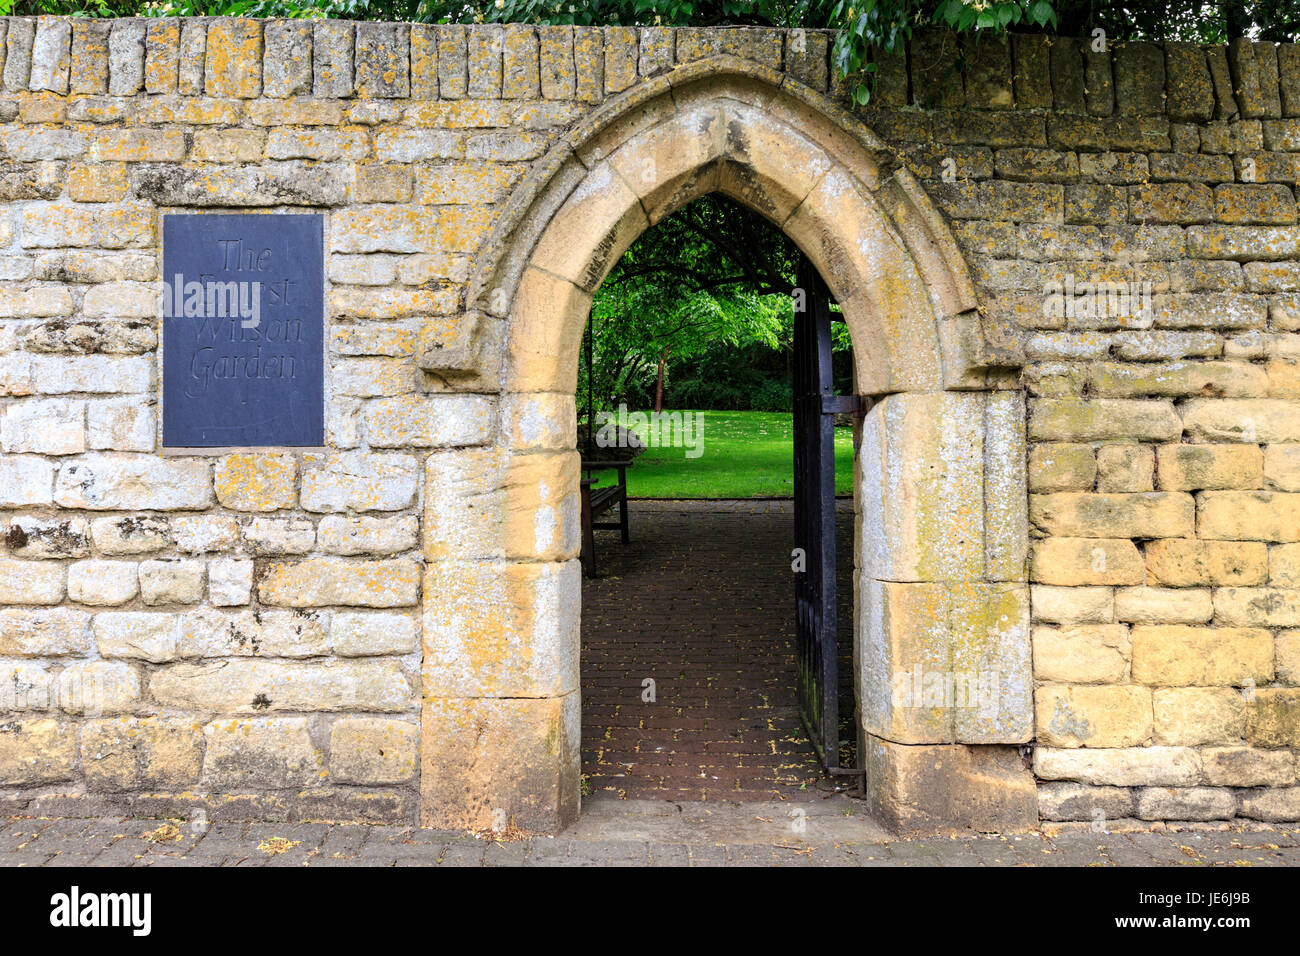 Cotswold stone wall entrance to the Ernest Wilson Memorial Garden, Chipping Campden, England Stock Photo